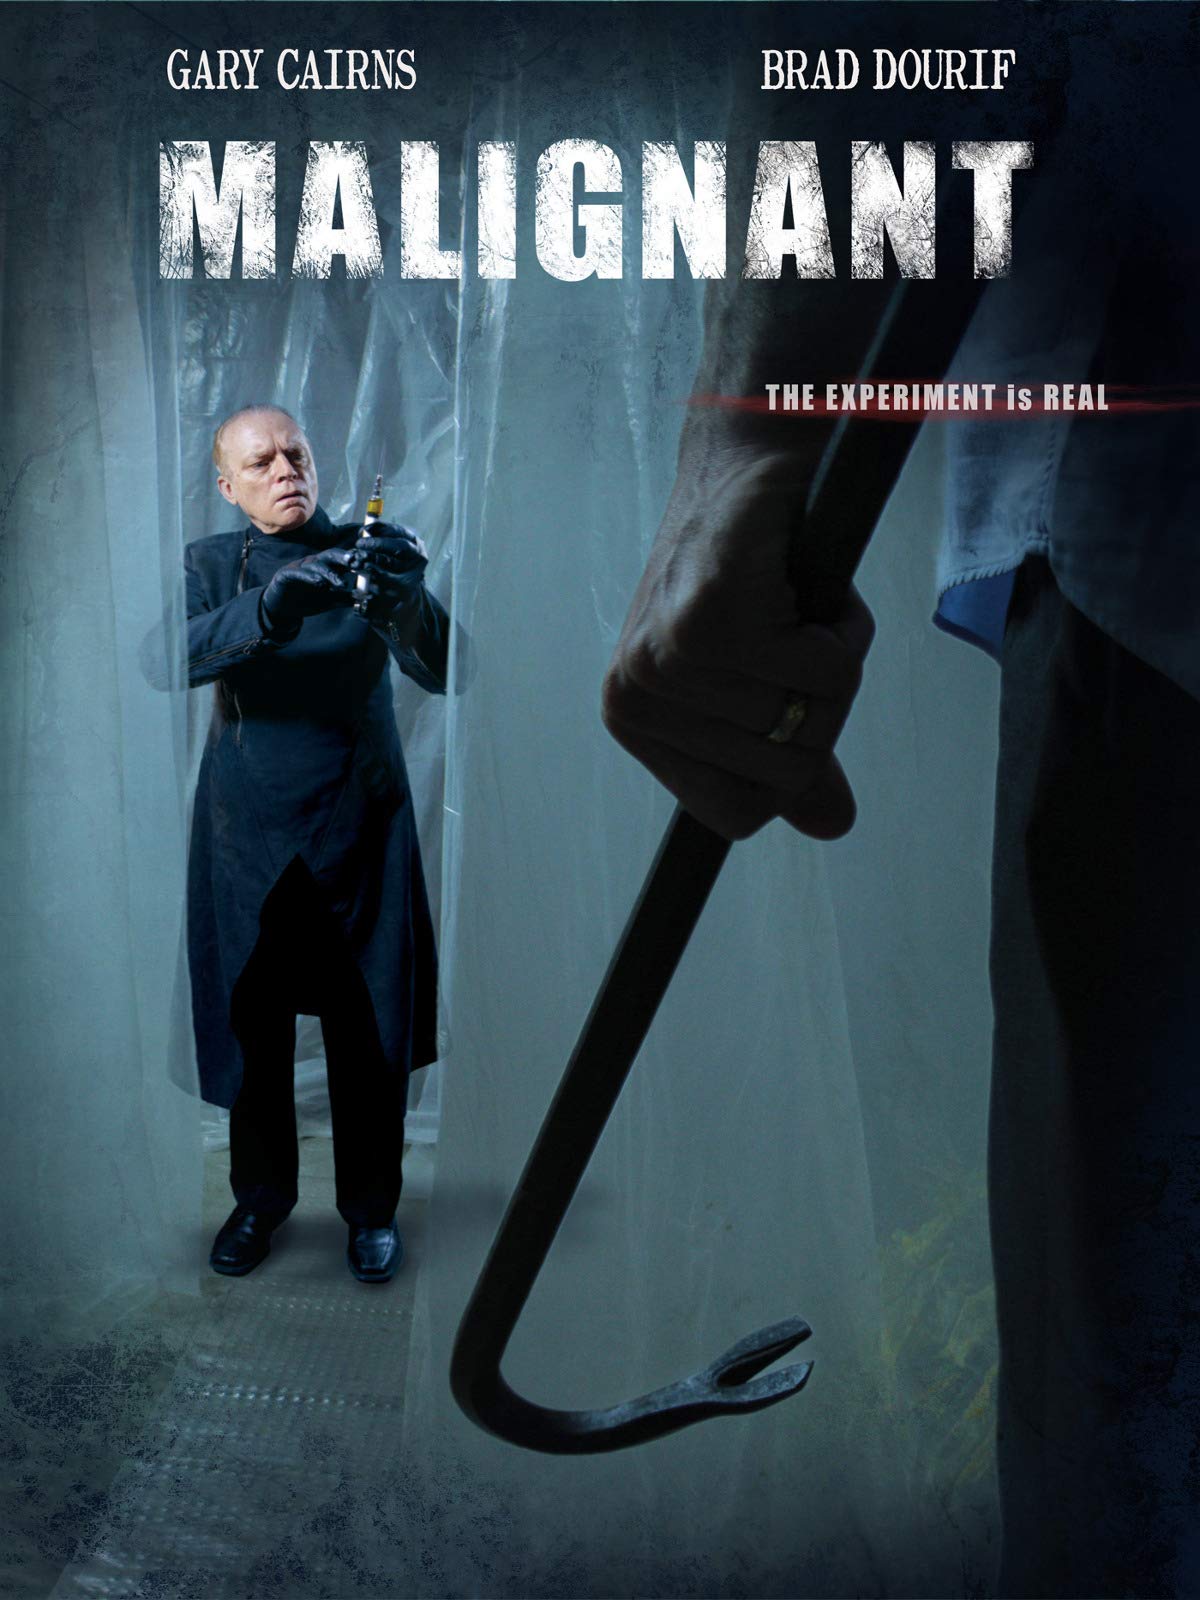 Malignant Part 2 Movie Post Credits Scene And What Does it Mean?